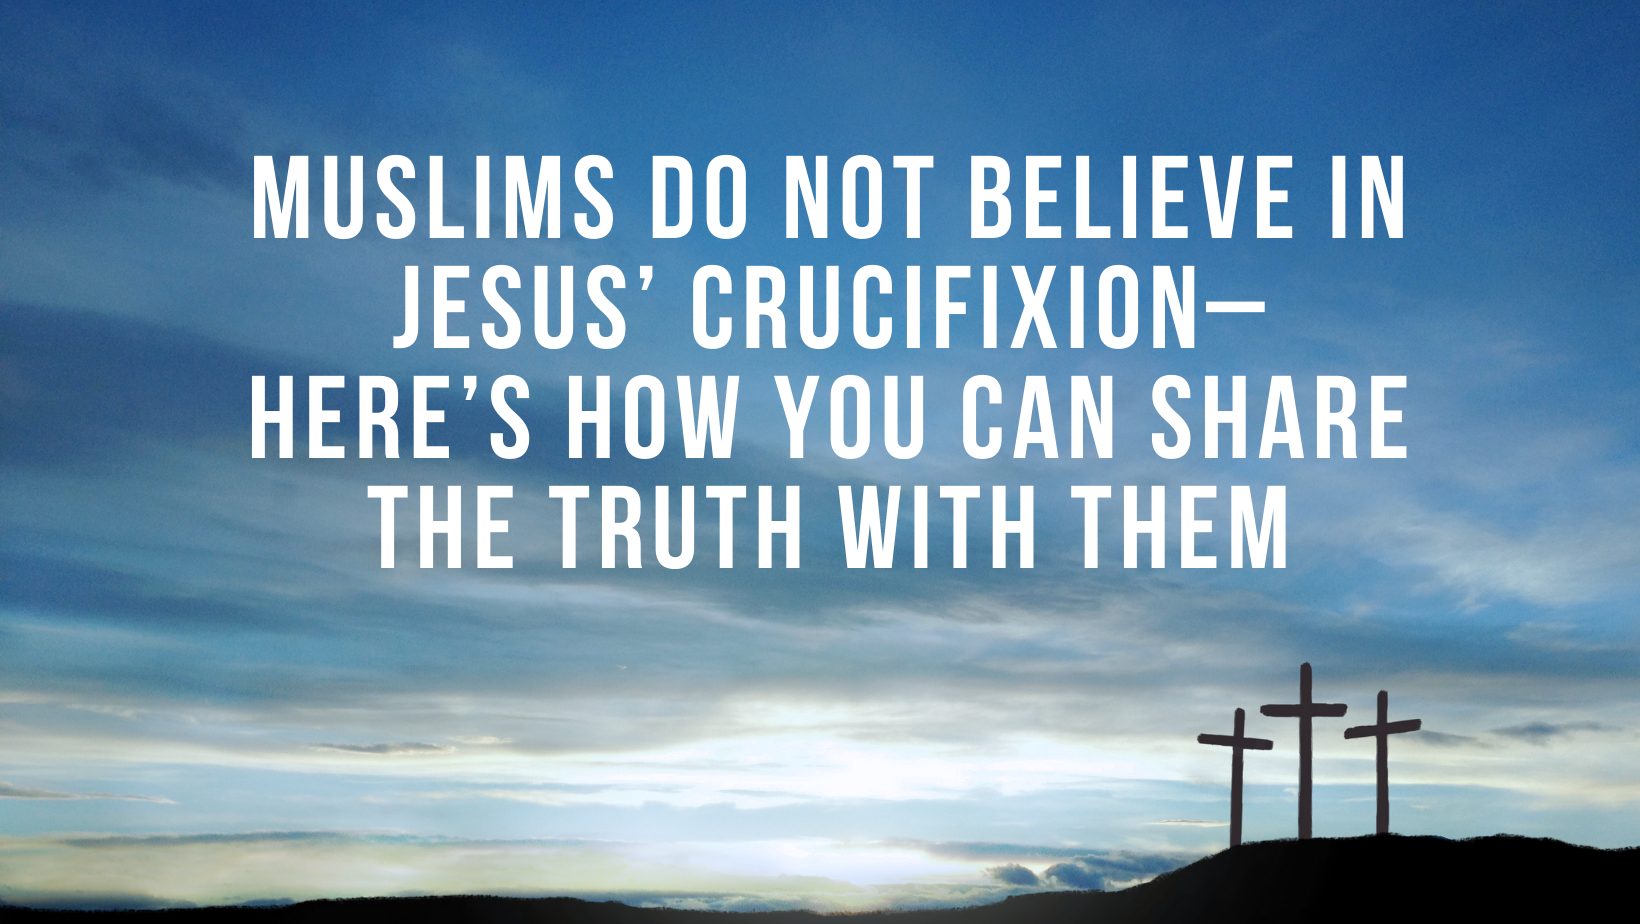 Muslims do not believe in Jesus’ crucifixion– Here’s how you can share the truth with them